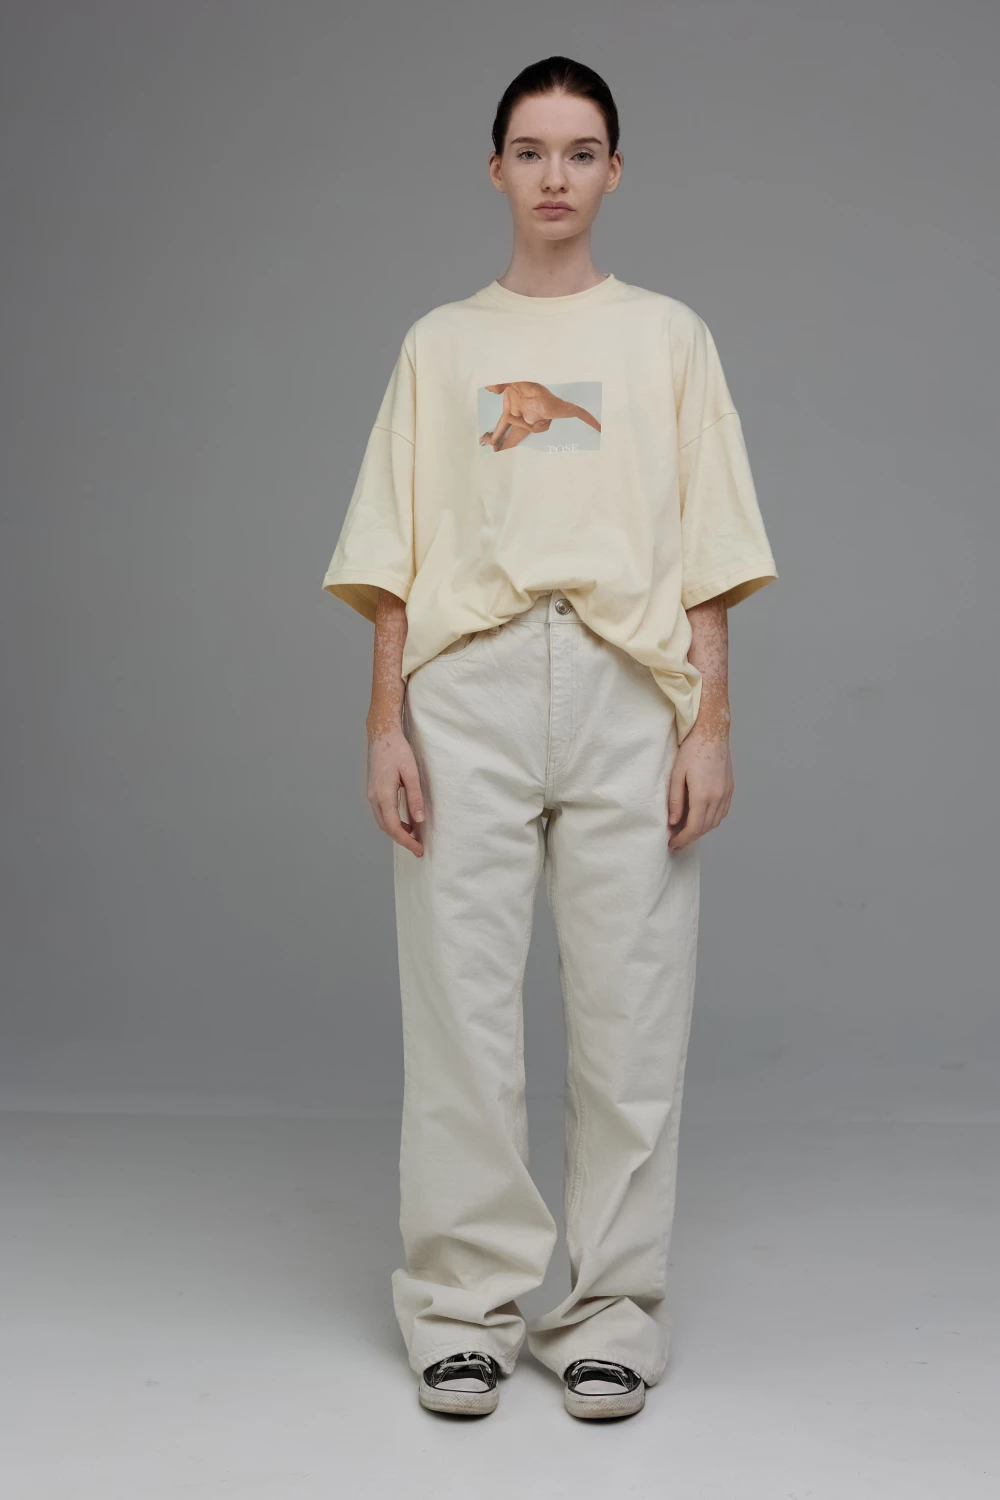 t-shirt above pose in vanilla color